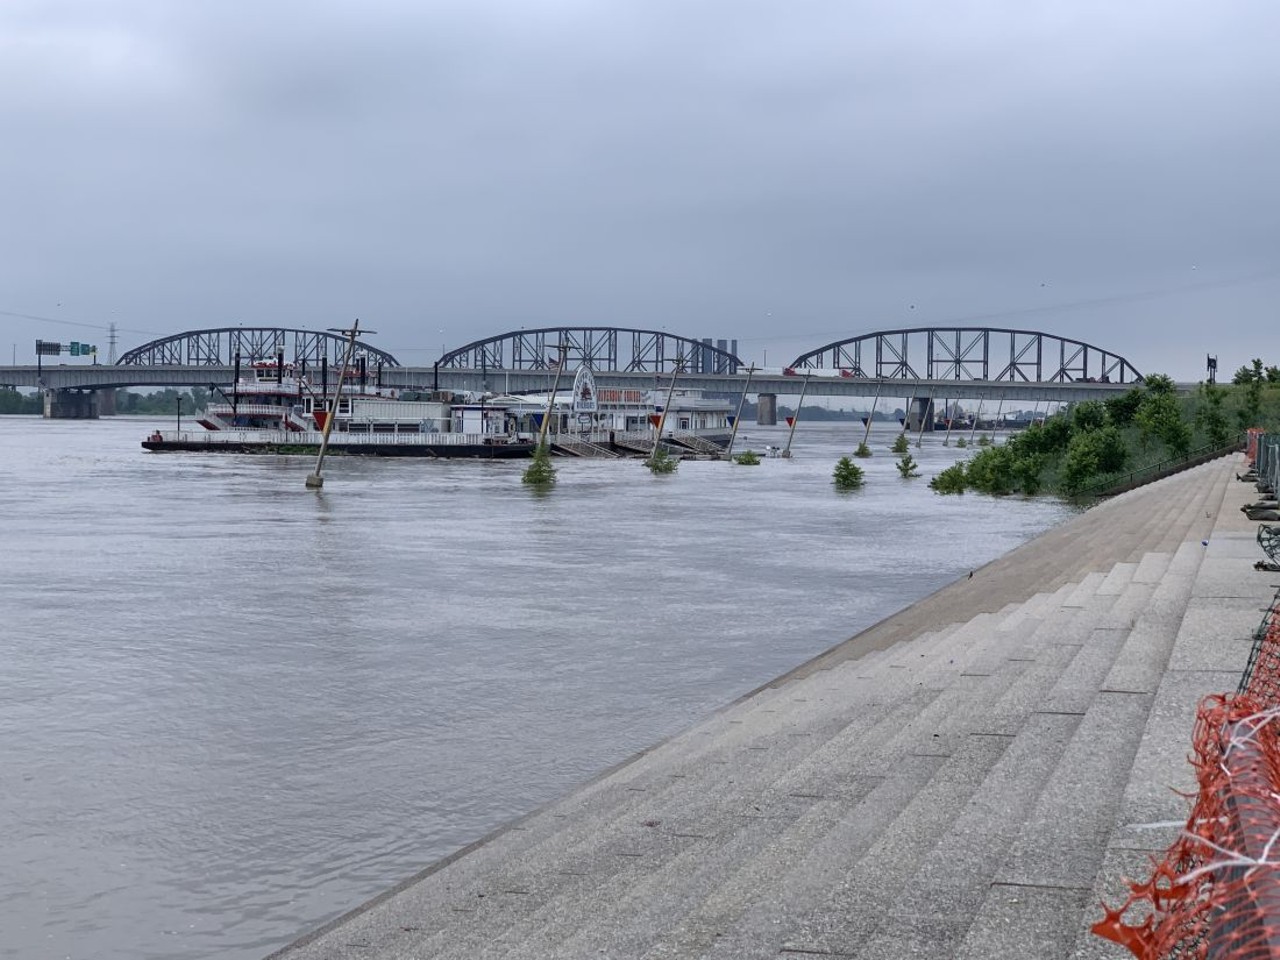 The Flooding in St. Louis at the Arch Is Insane as the Mississippi River Crests [PHOTOS]